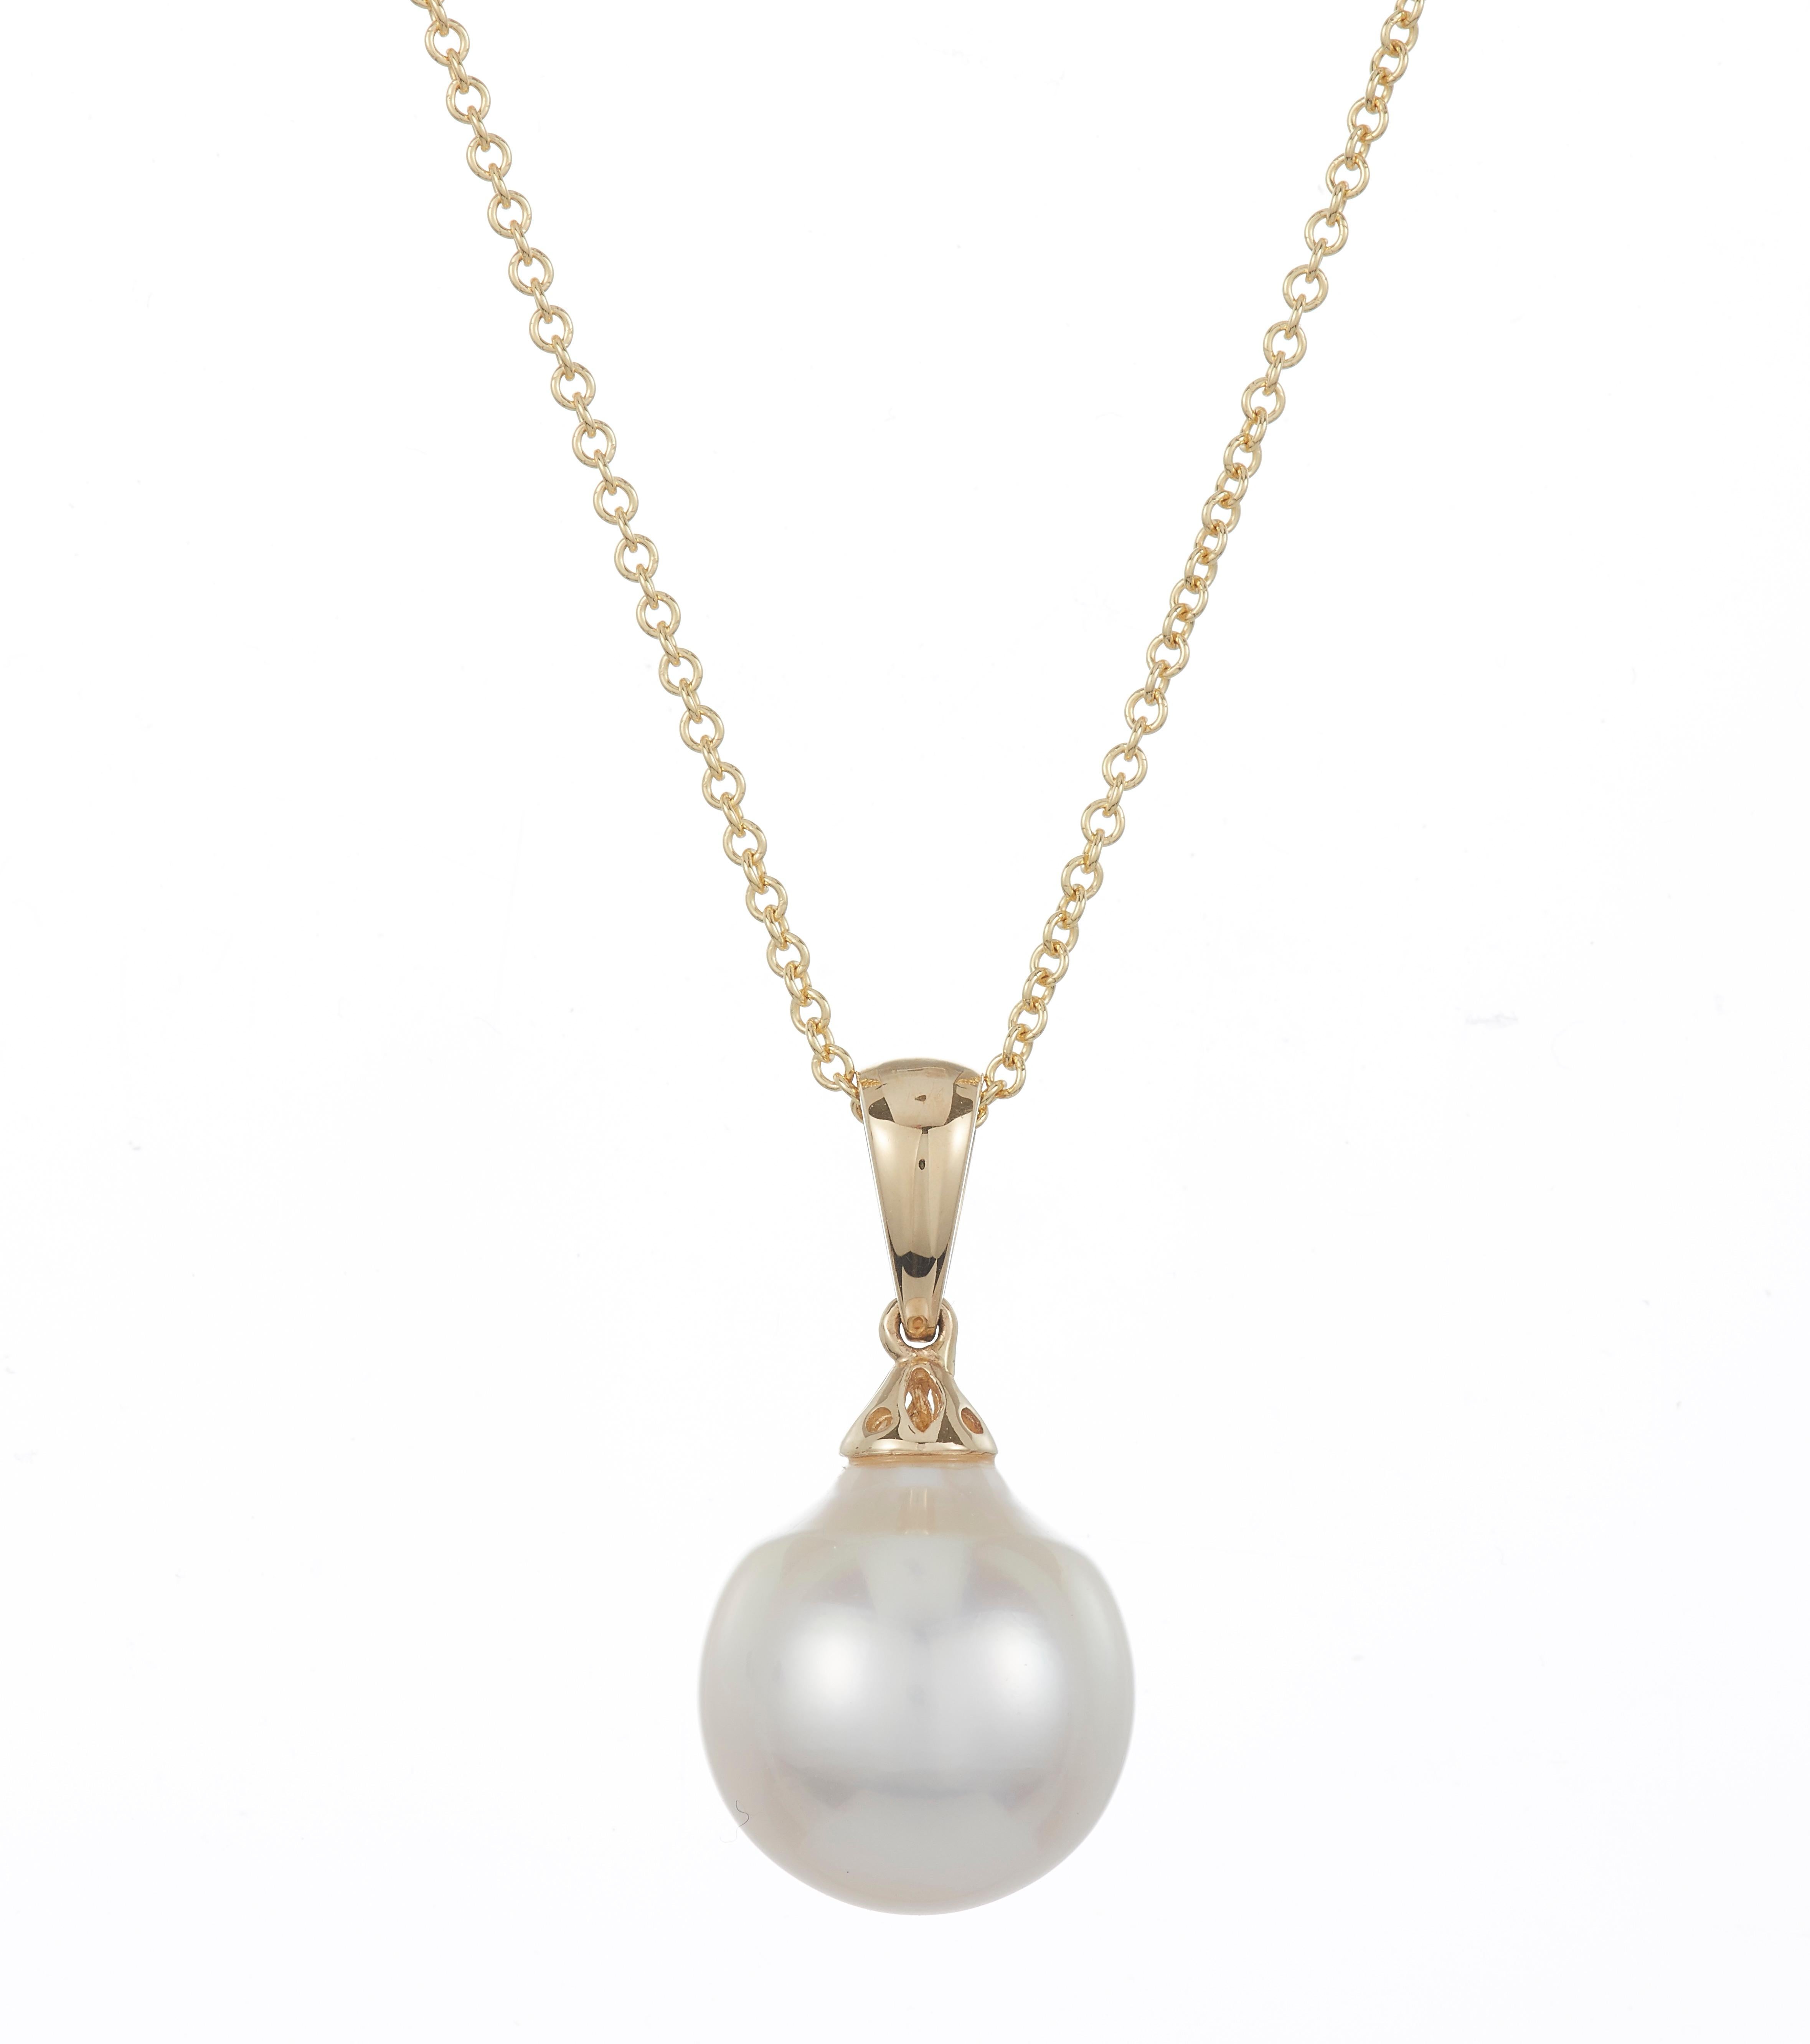 14K Yellow Gold
Stone Details: 1 Round Tahitian South Sea Pearl at 12.50 Millimeters
Diamond Details: 1 Brilliant Round White Diamond at 0.02 Carats - Clarity: SI / Color: H-I

Fine one-of-a-kind craftsmanship meets incredible quality in this